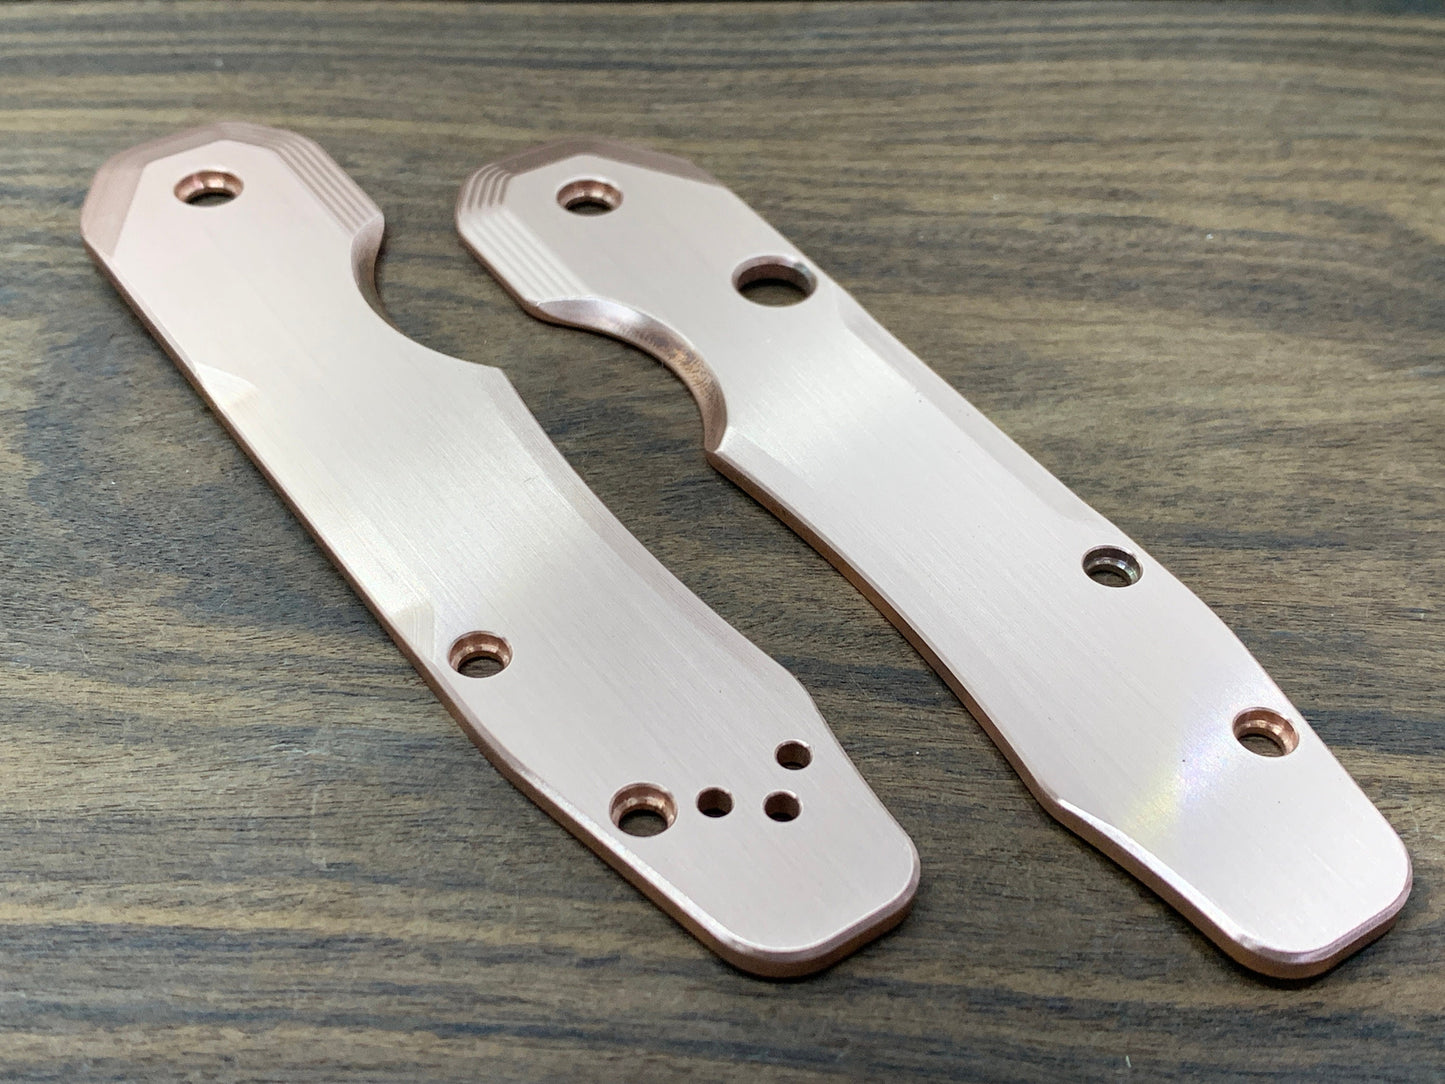 BRUSHED Copper Scales for Spyderco SMOCK